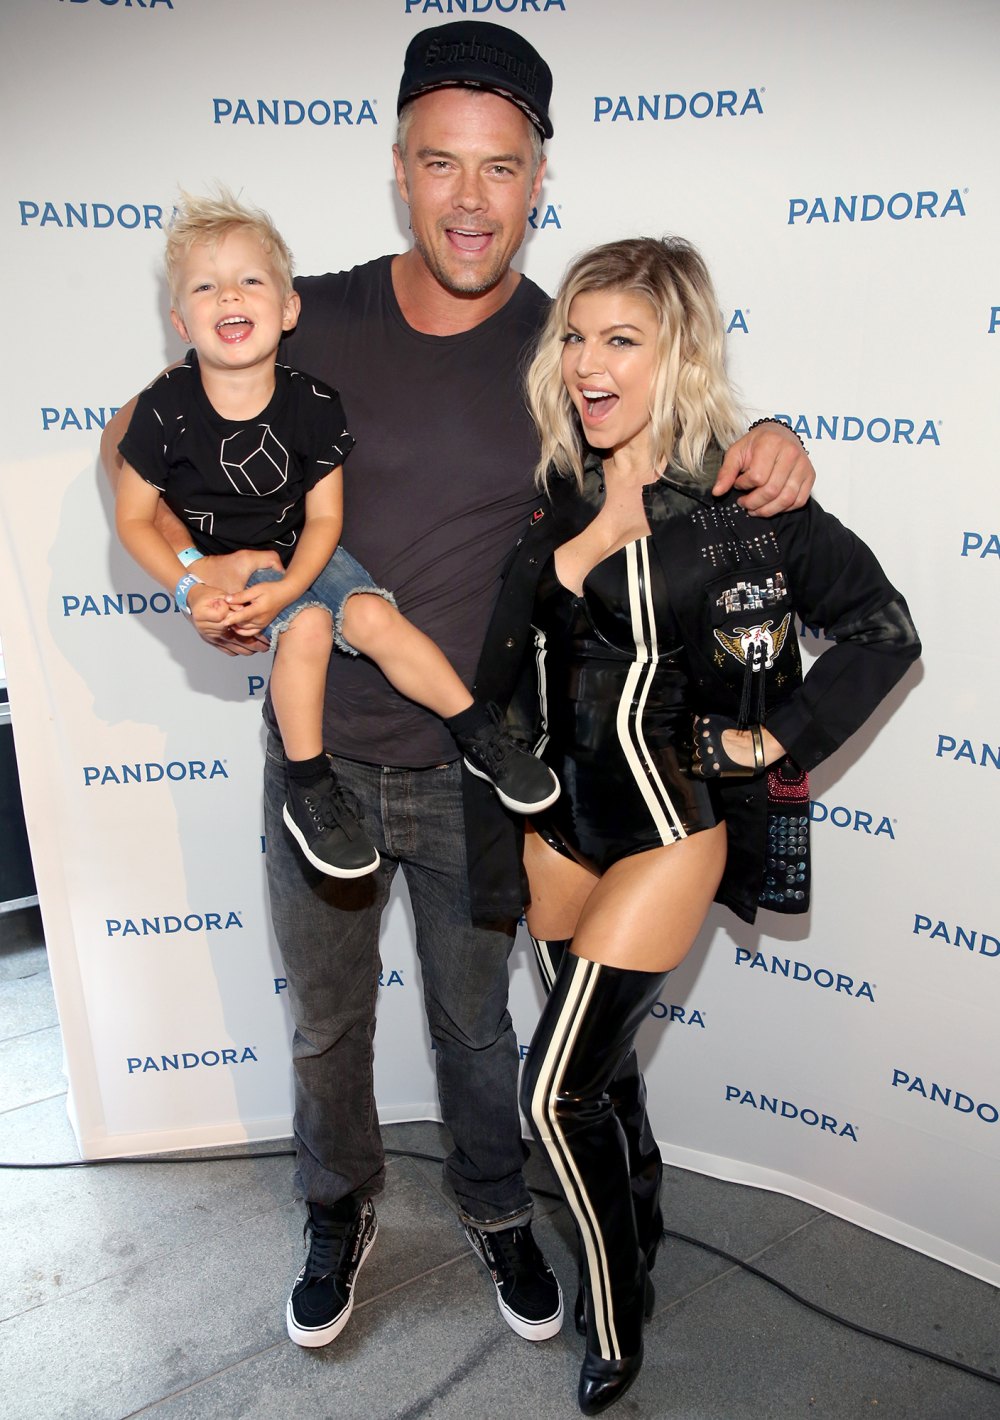 Fergie and Josh Duhamel's Son Axl Is All Grown Up in New Photos to Celebrate 10th Birthday